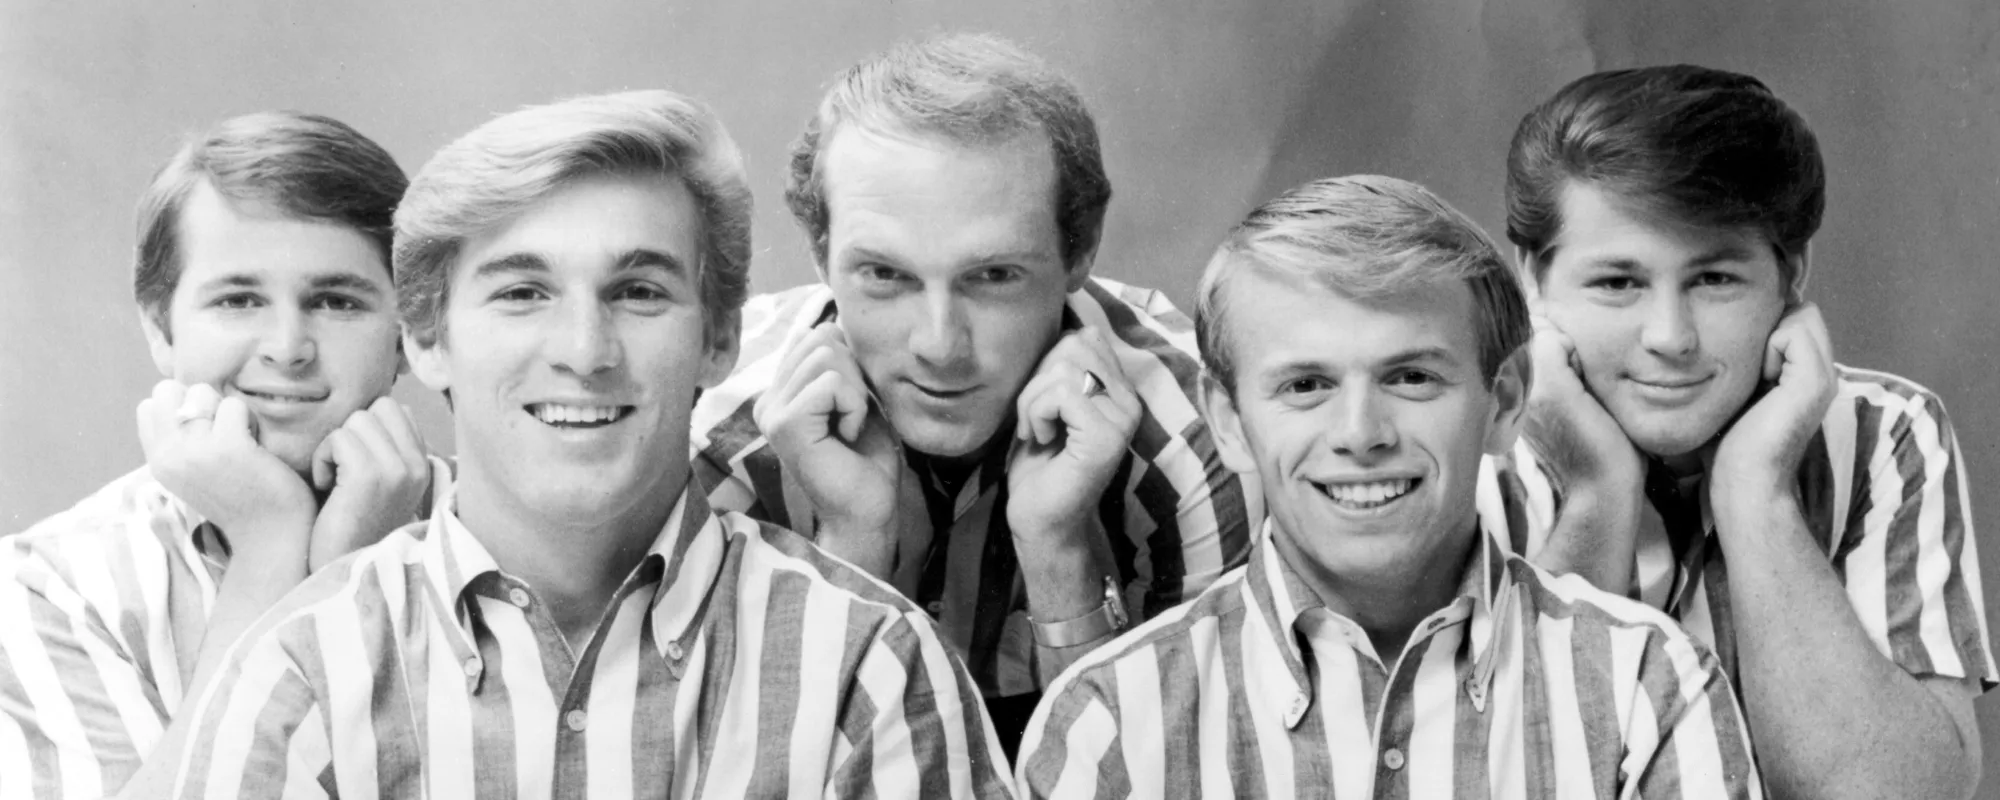 5 Brilliant Live Moments in Honor of The Beach Boys’ Carl Wilson